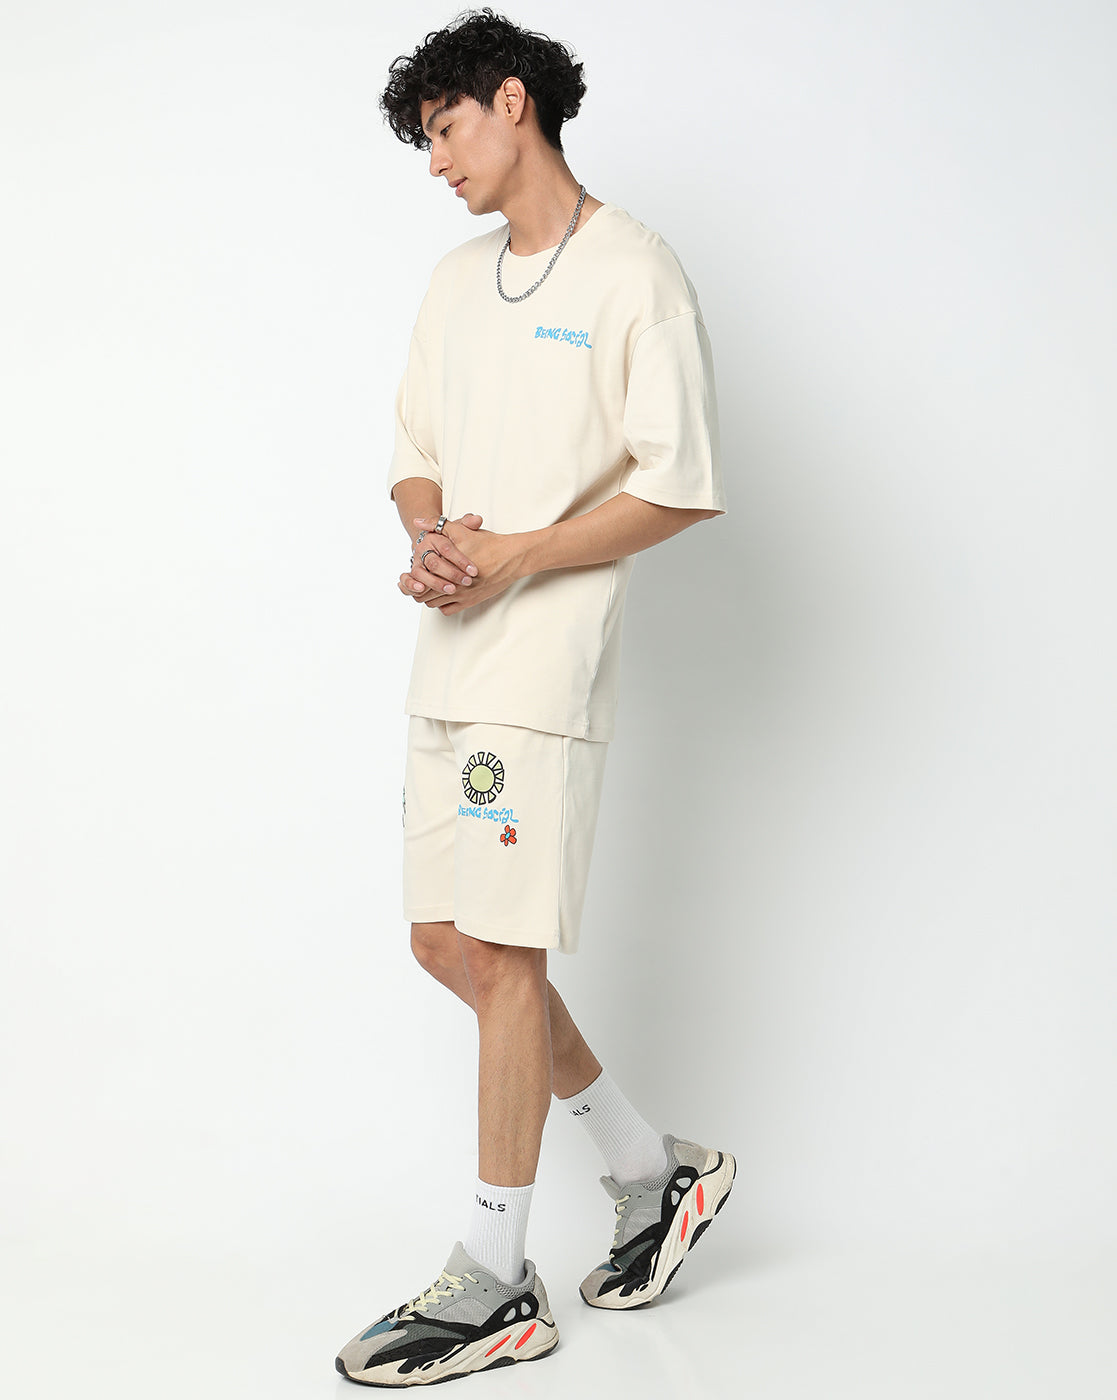 Off White Being Social Graphic Printed Oversized Co-ords